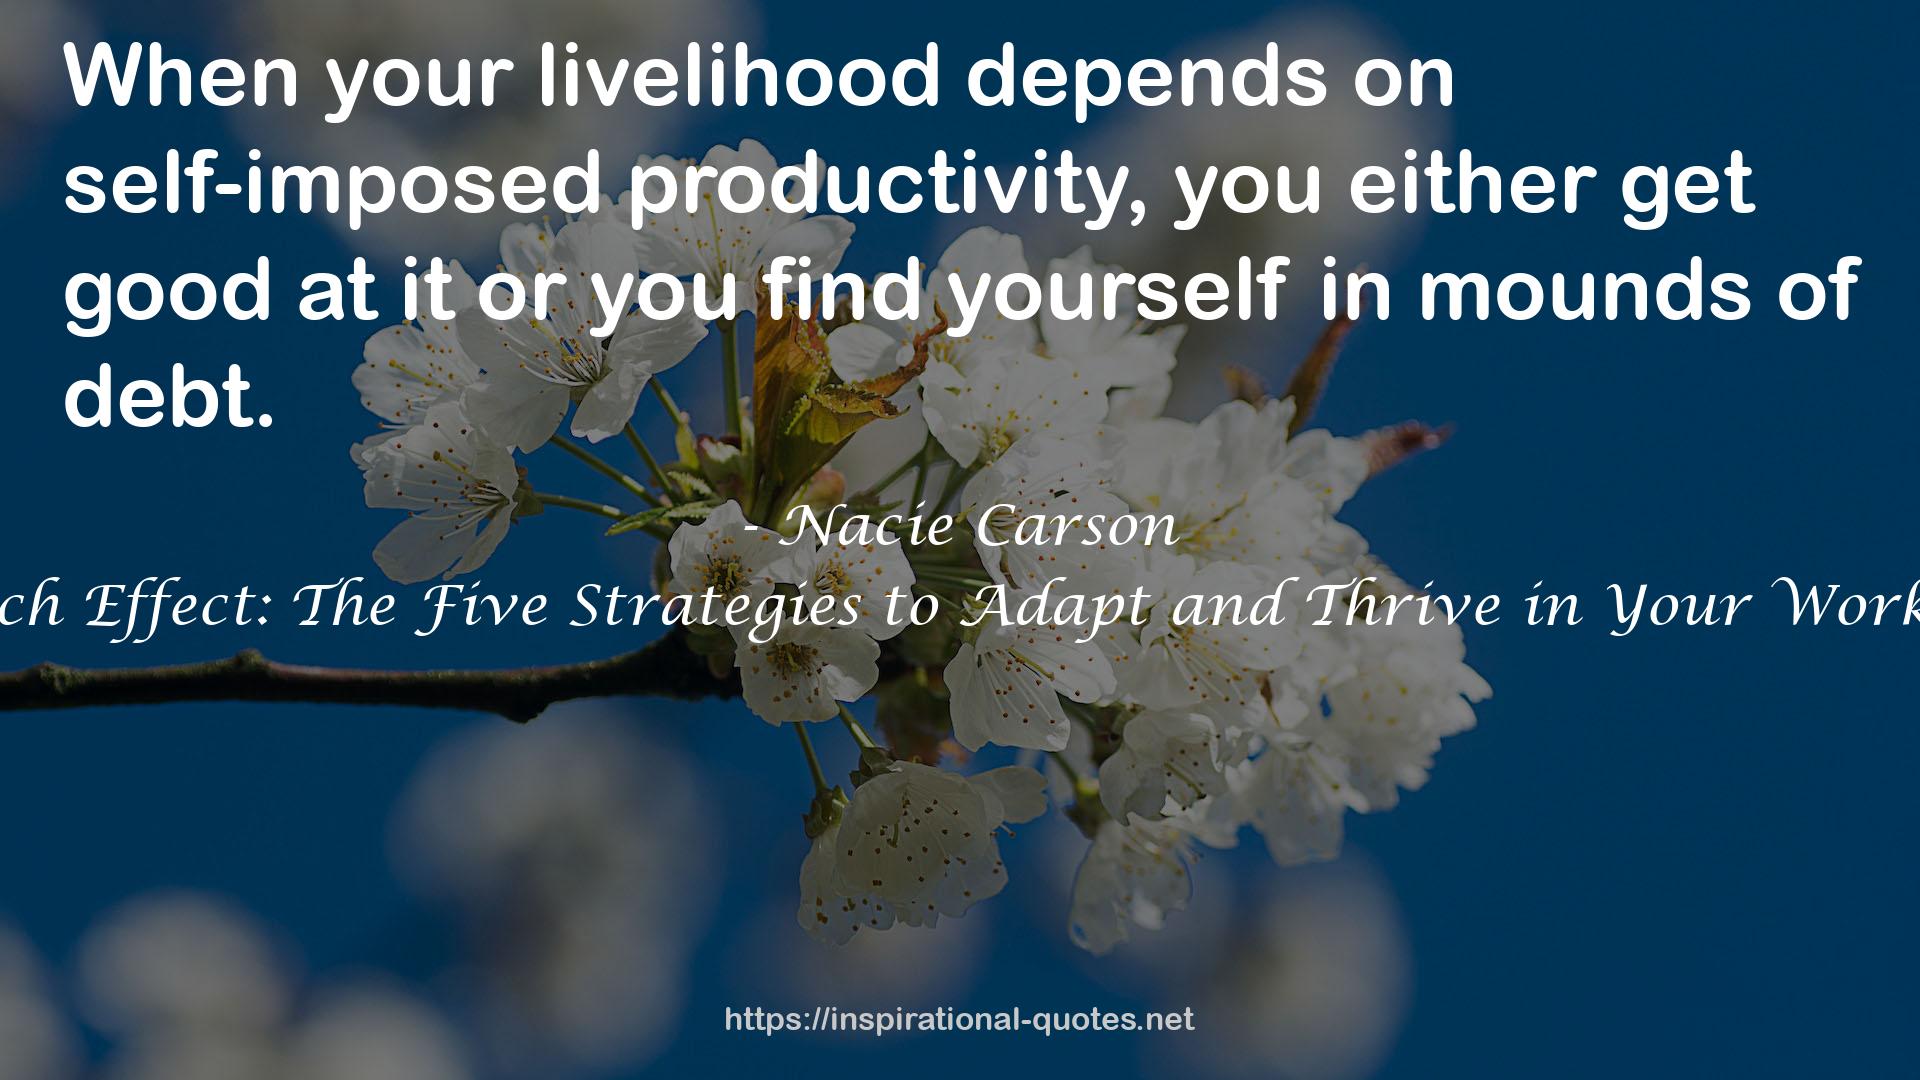 The Finch Effect: The Five Strategies to Adapt and Thrive in Your Working Life QUOTES